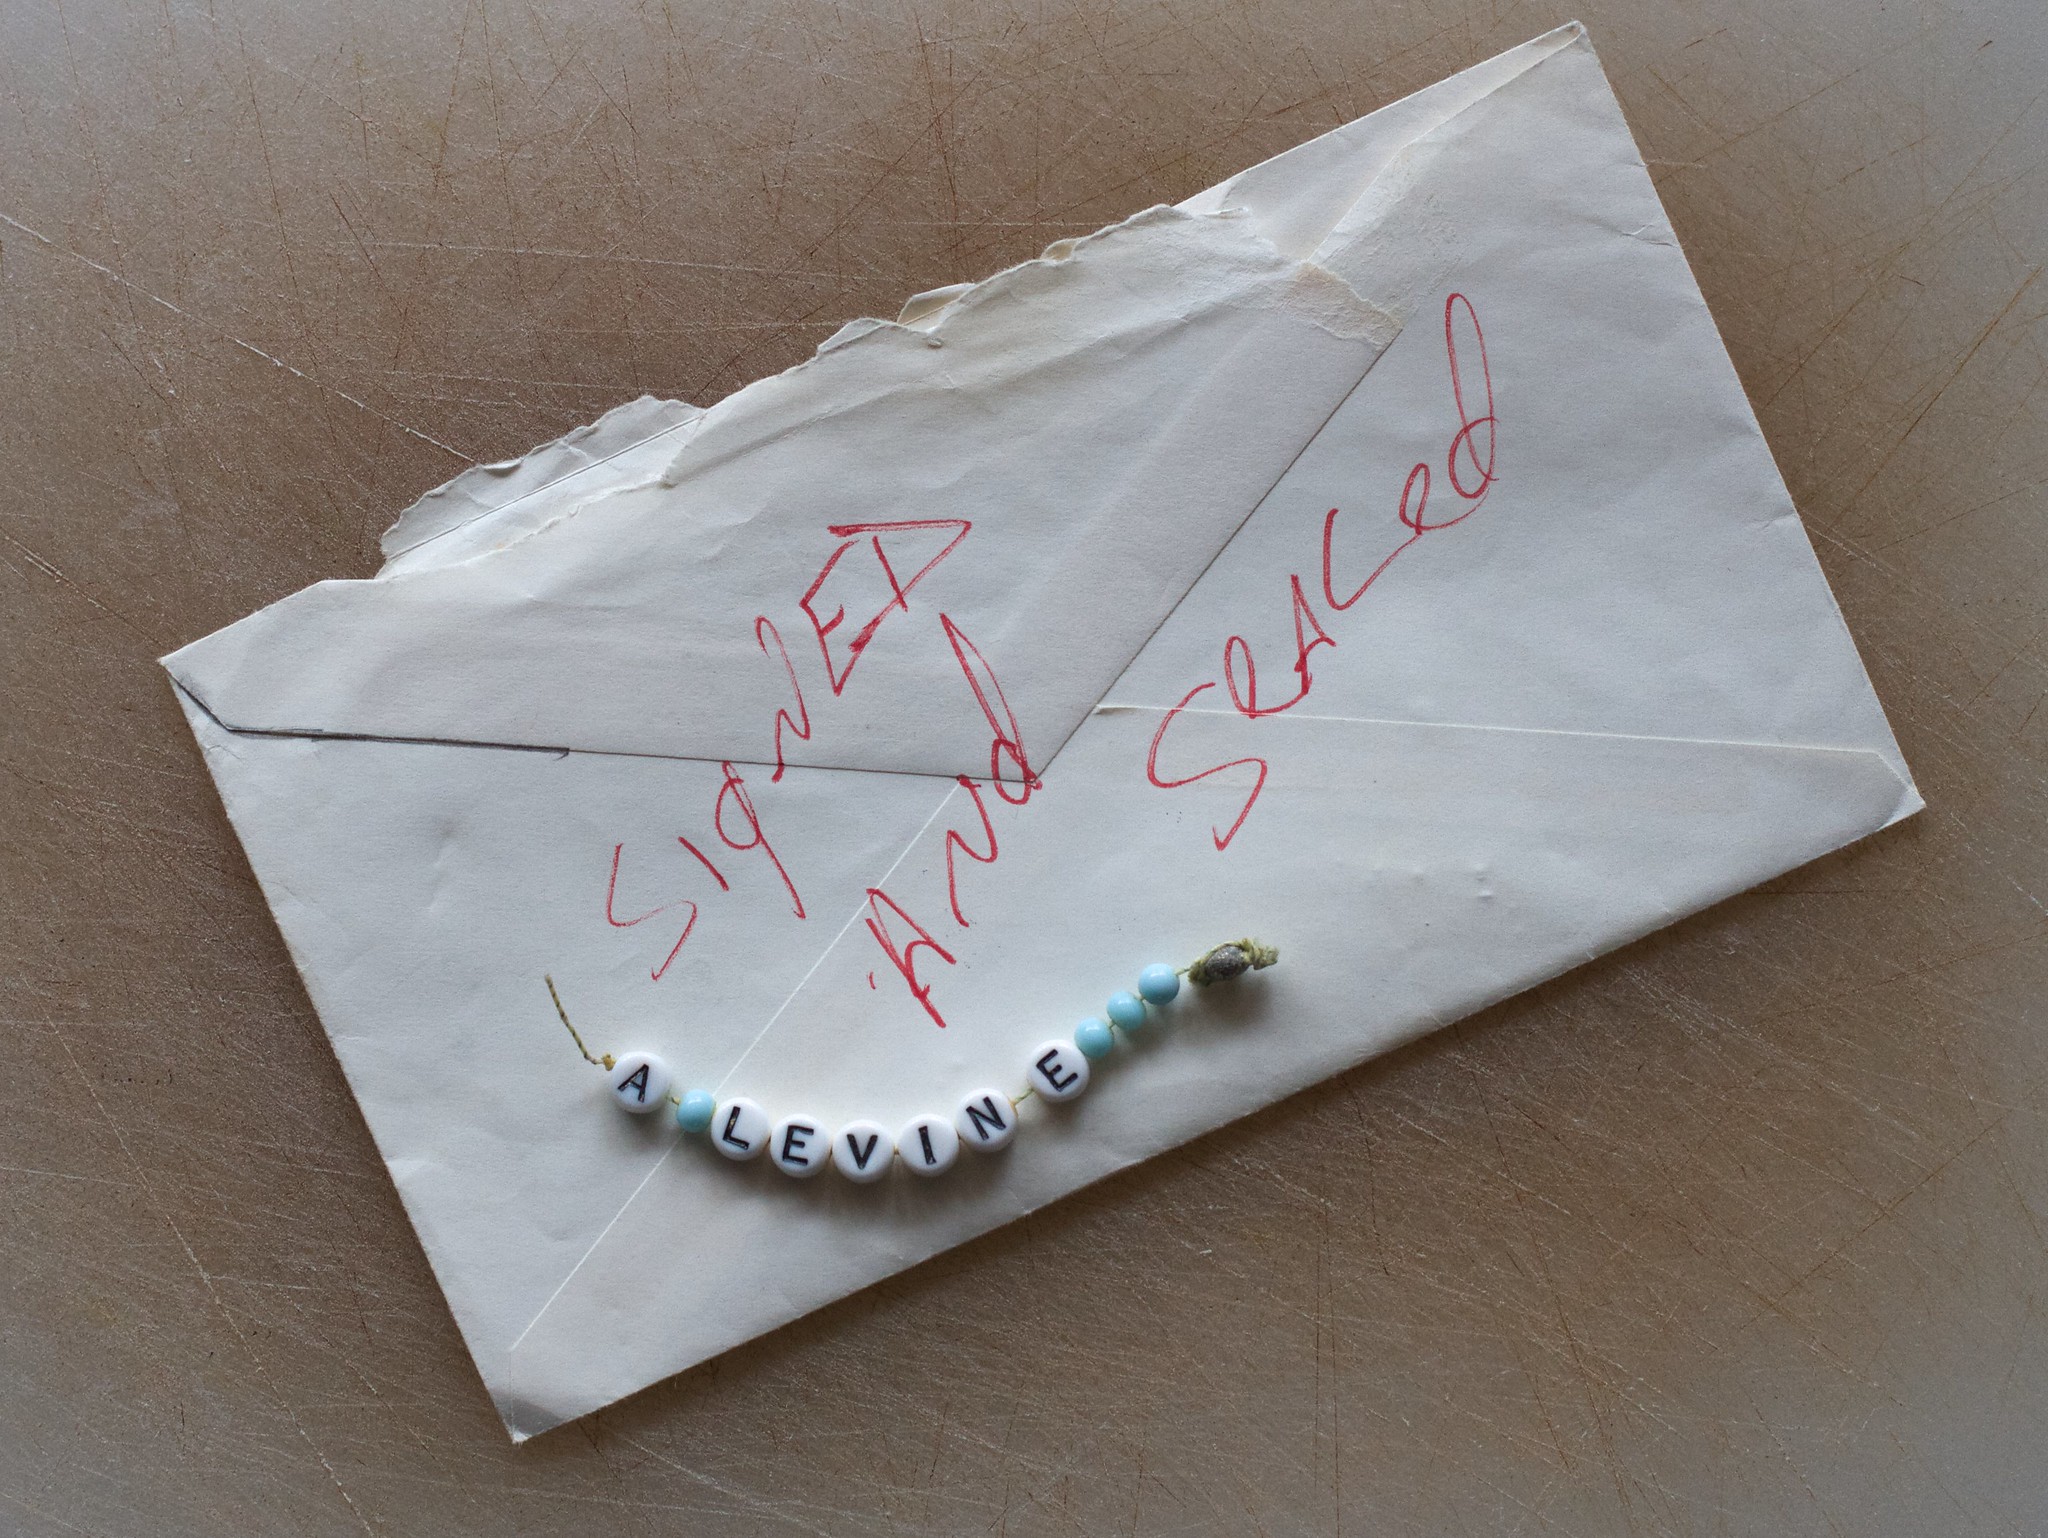 An envelope with a bracelet on top | Source: Flickr